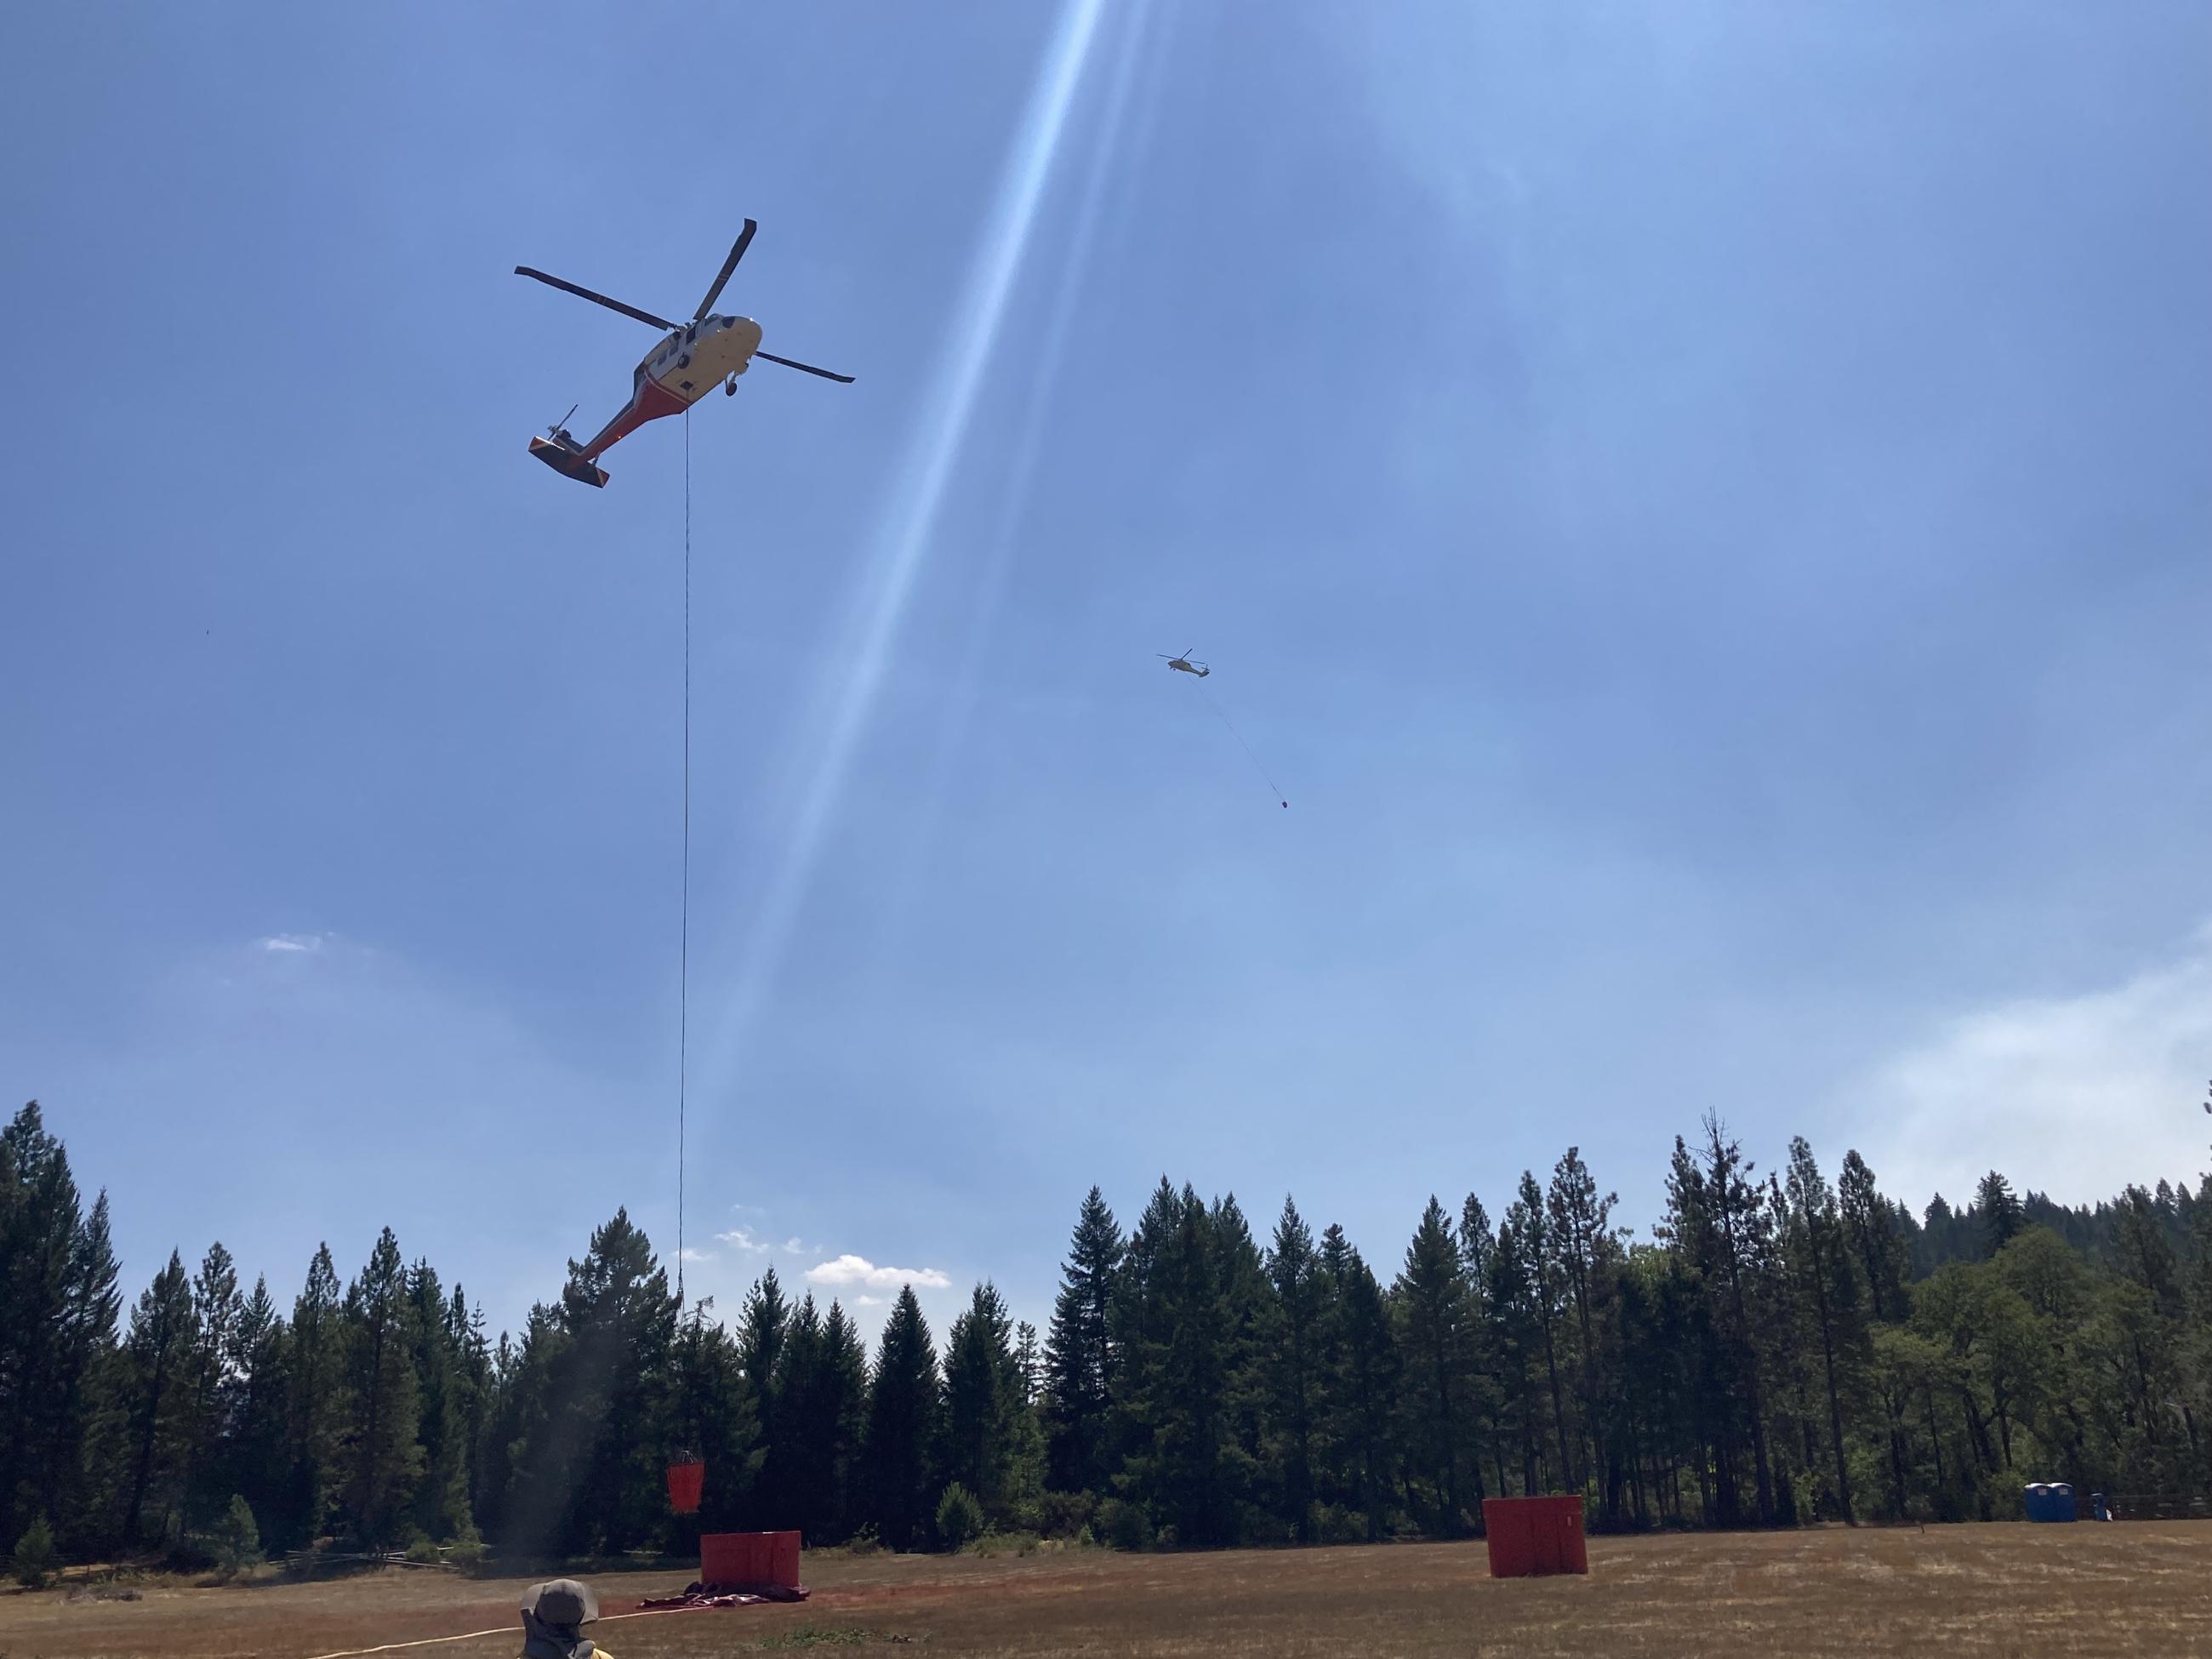 Helicopter dipping at mobile retardant base, August 29